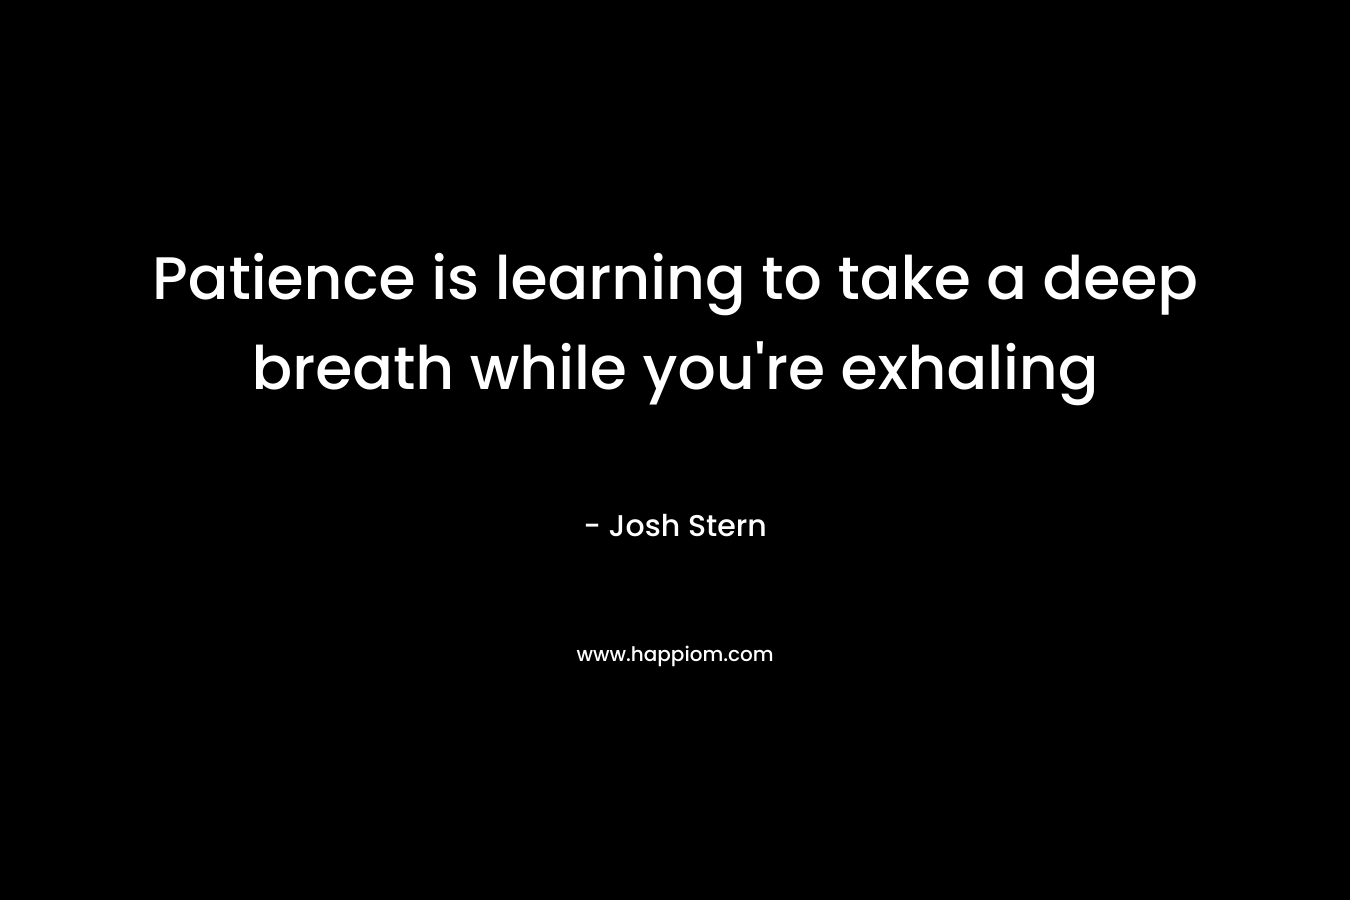 Patience is learning to take a deep breath while you’re exhaling – Josh Stern